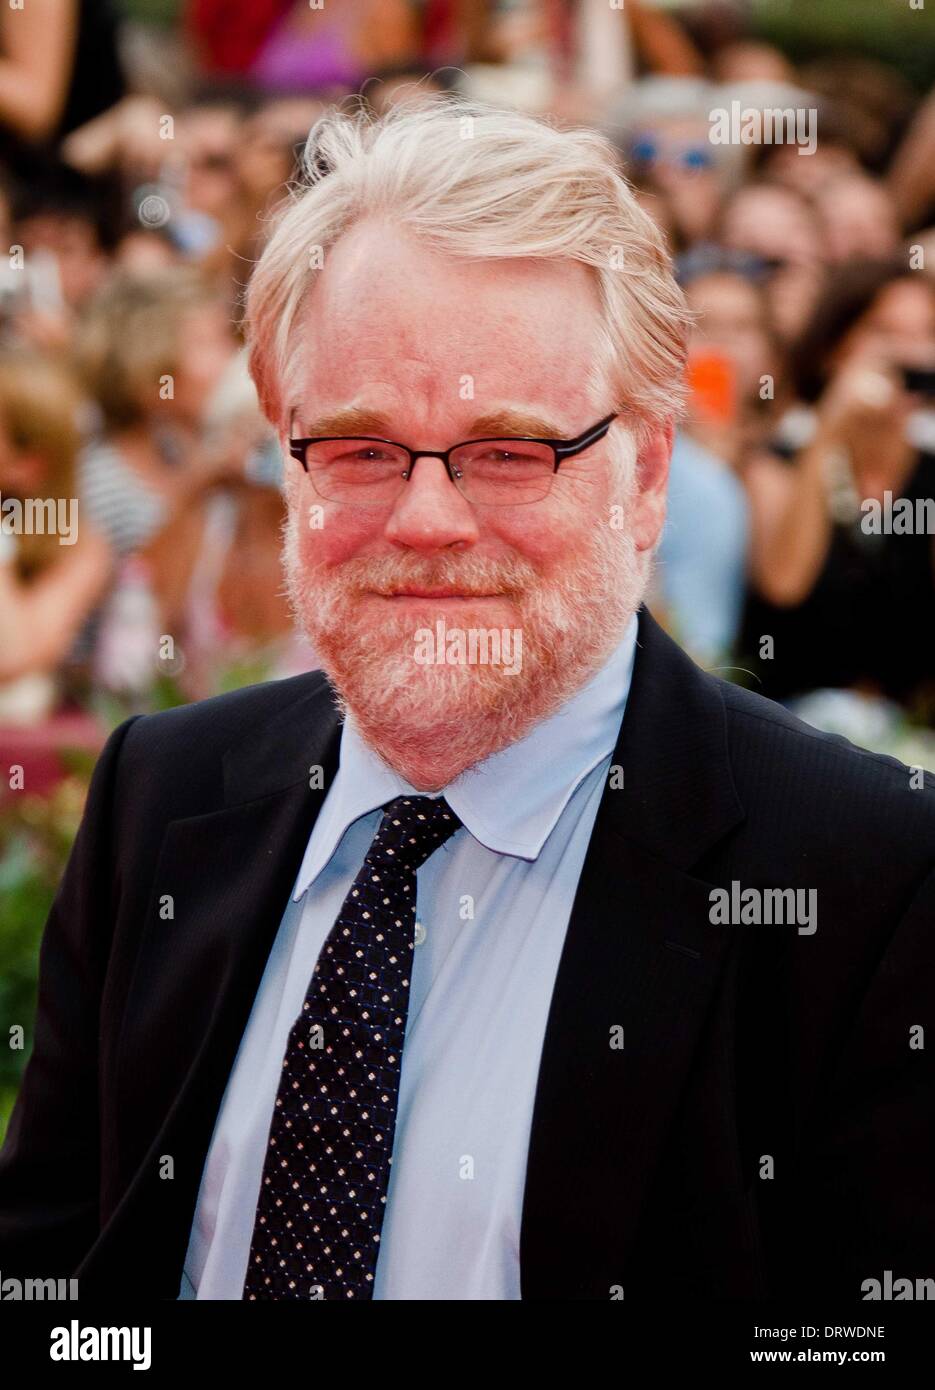 Venice, Italy. 31st Aug, 2011. Actor Philip Seymour Hoffman arrives at the premiere of 'The Ides Of March' during the 68th Venice International Film Festival at Palazzo de Cinema in Venice, Italy, 31 August 2011. Photo: Hubert Boesl/dpa/Alamy Live News Stock Photo